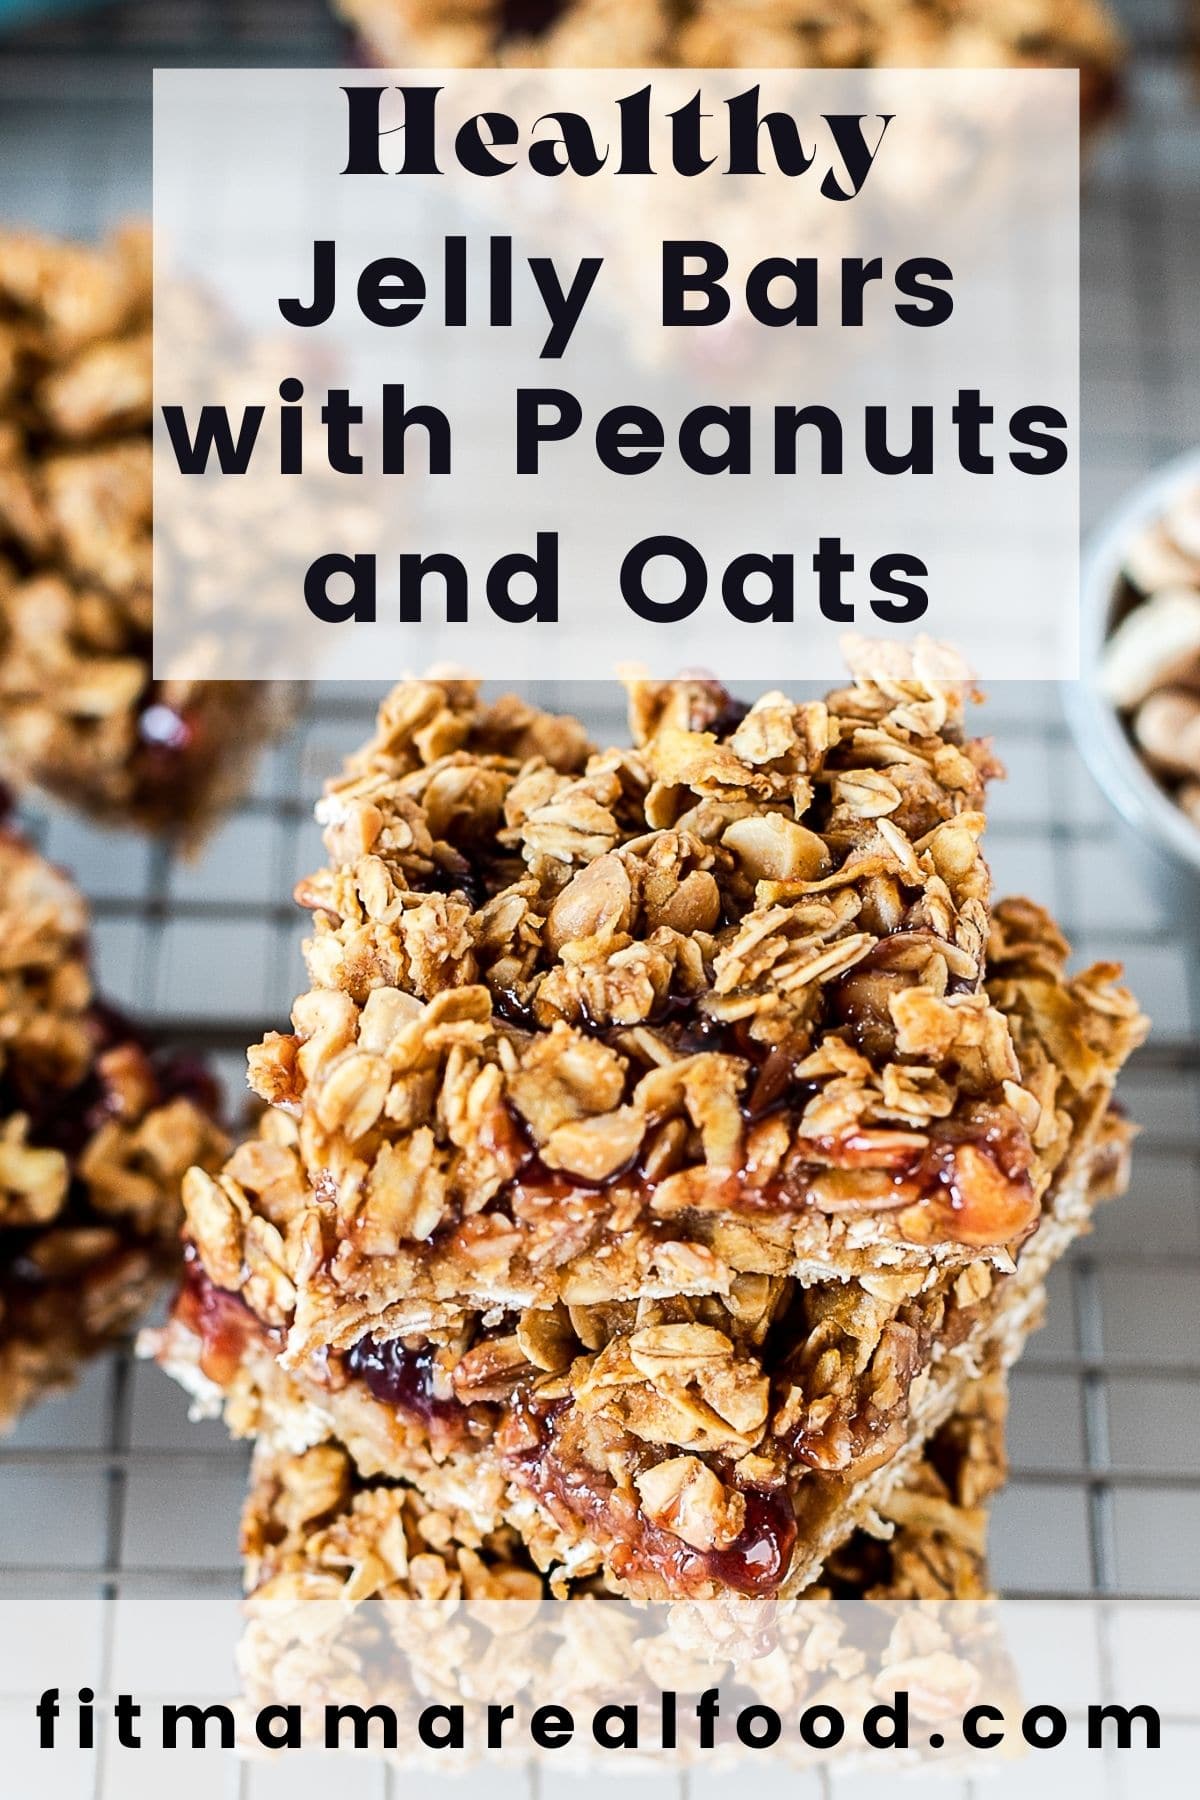 Jelly Bars with Peanuts and Oats